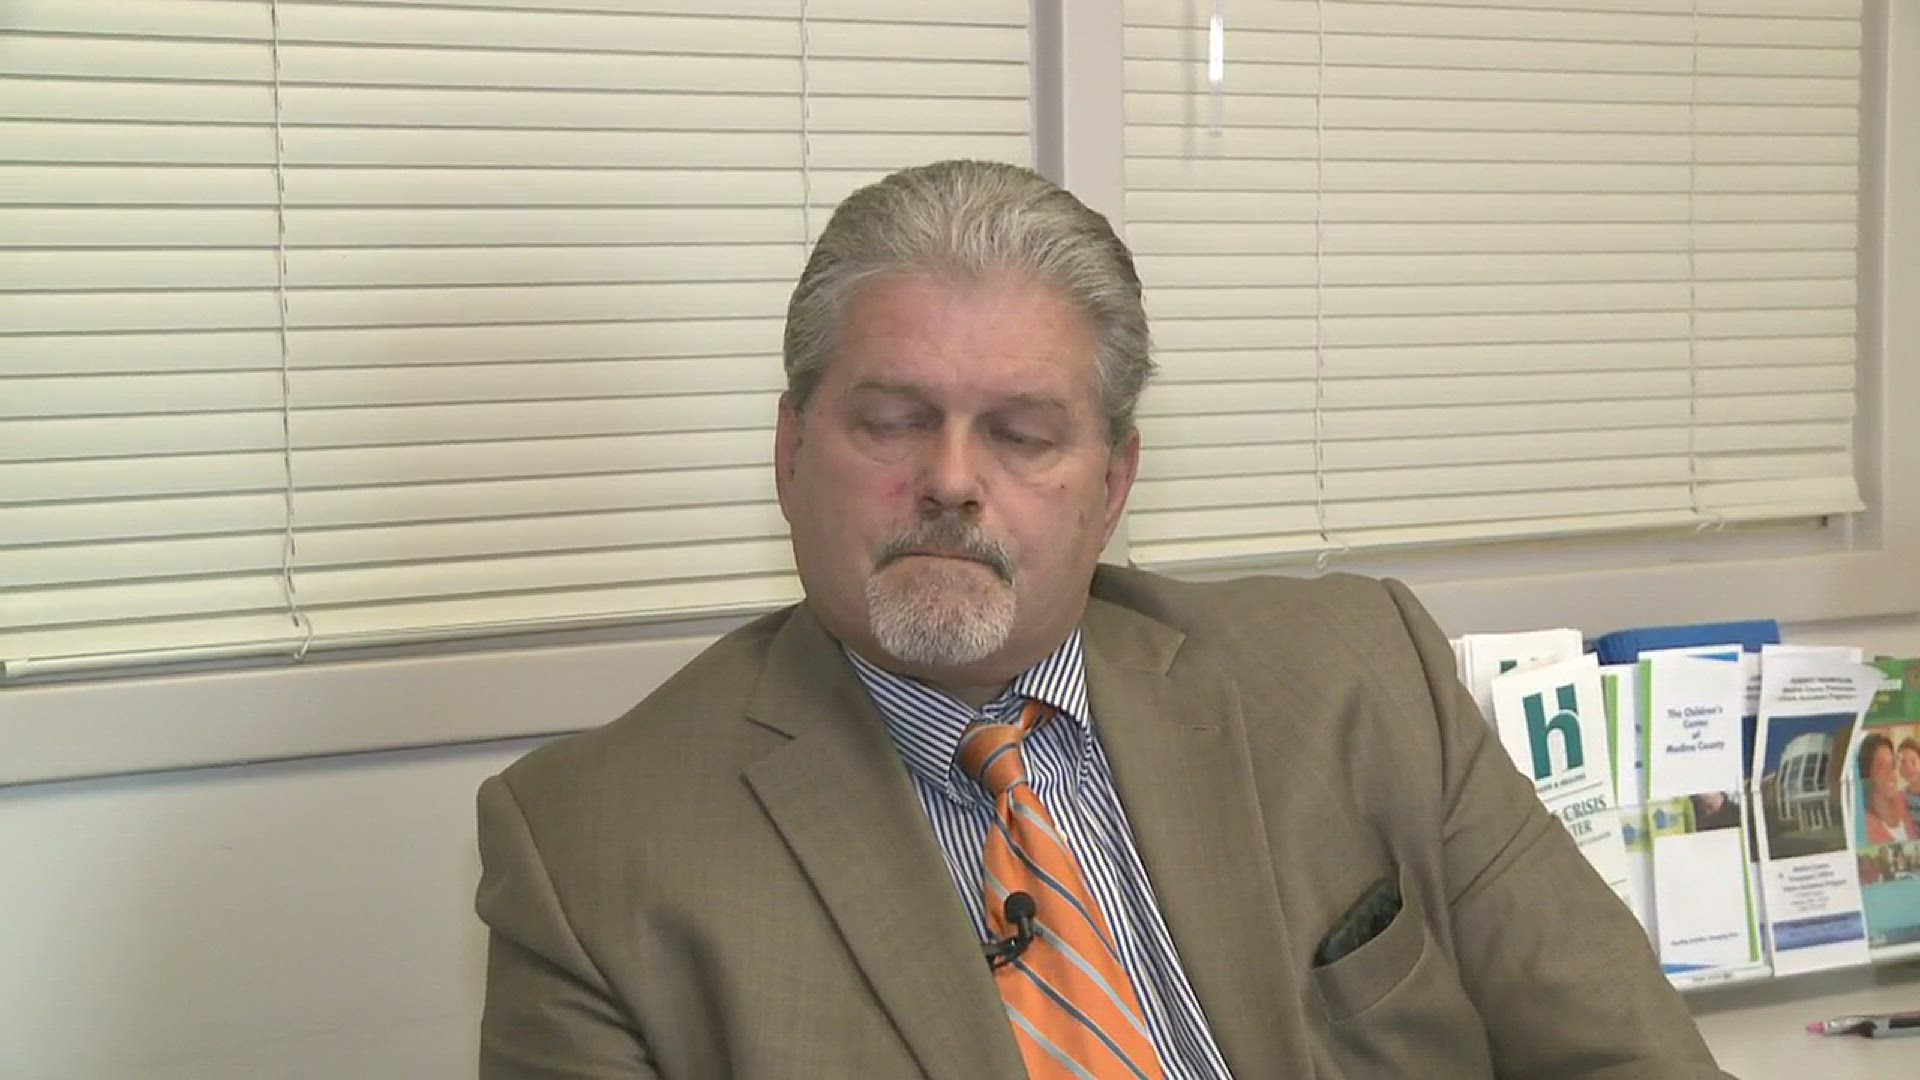 April 5, 2017: Watch the full 12-minute conversation with Medina County Prosecutor Forrest Thompson regarding the release of autopsy results in the death of Lafayette Township trustee Bryon Macron.